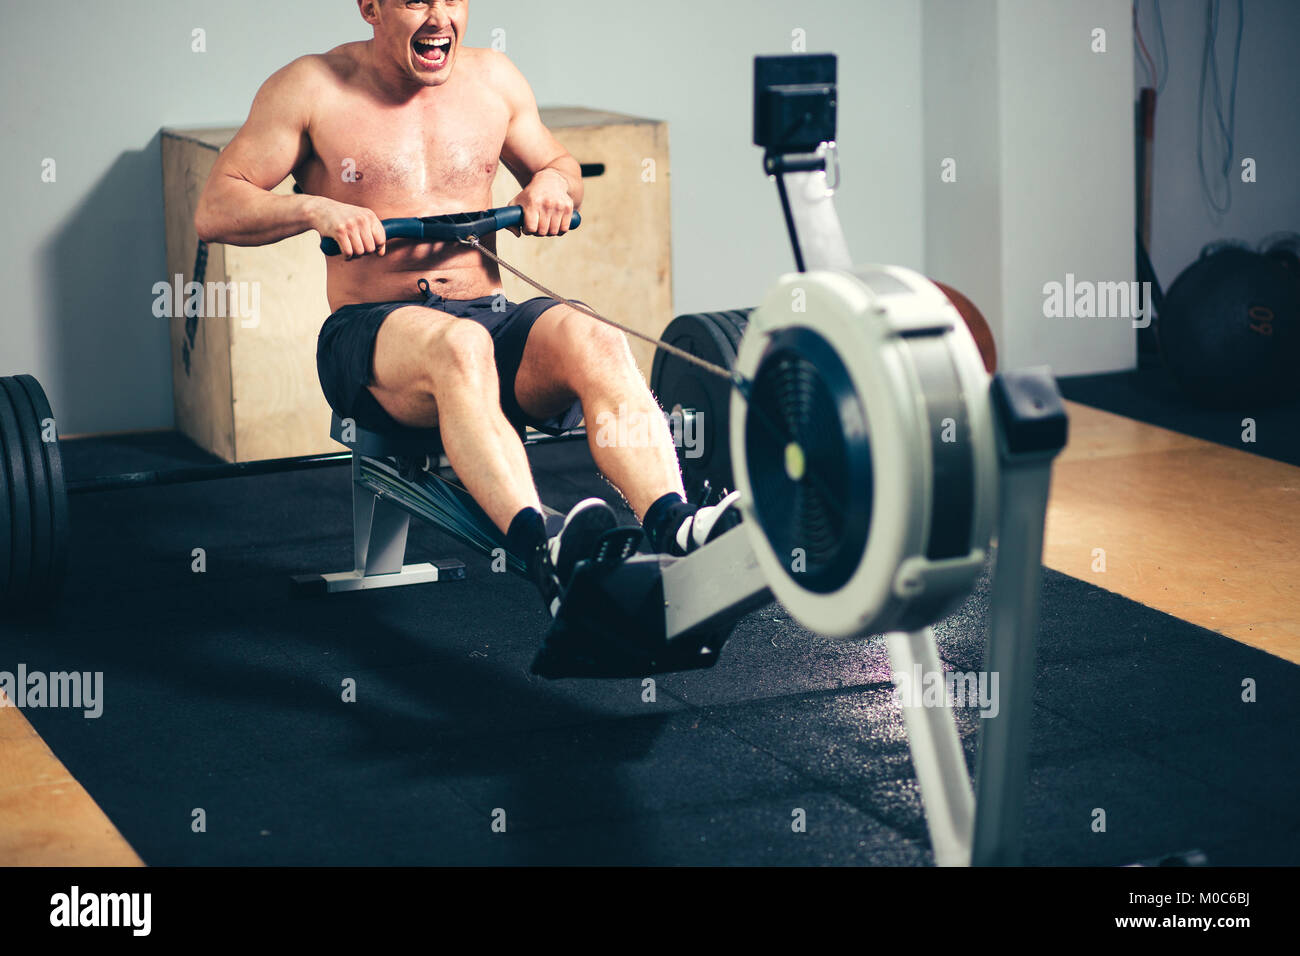 Fit man training on row machine in gym Stock Photo